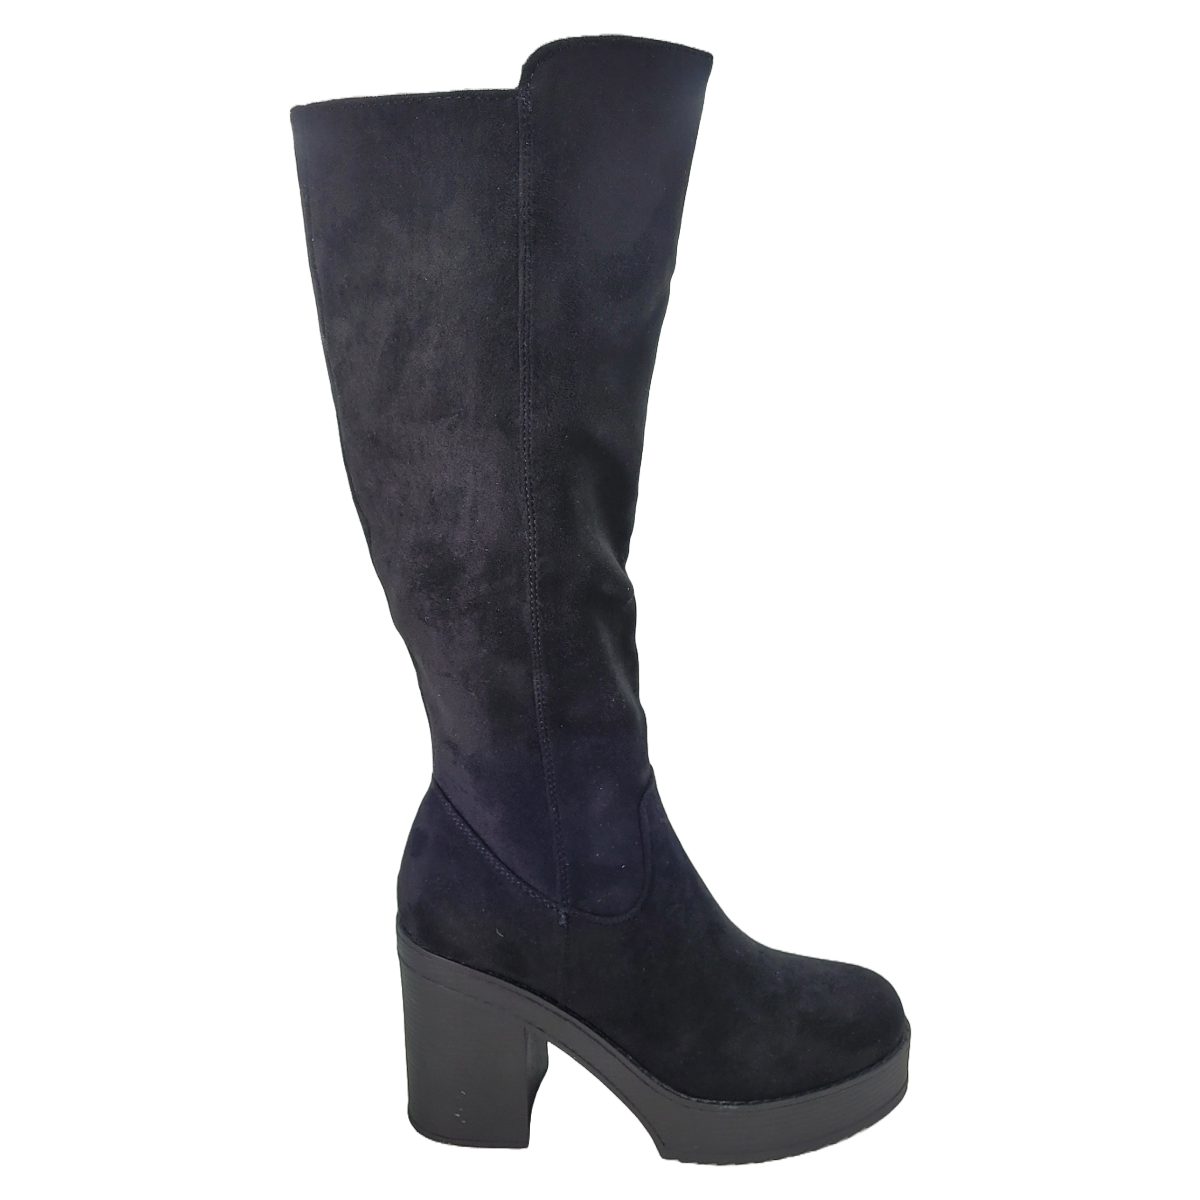 BOTAS TUO TUO MUJER NEGRO 22-25